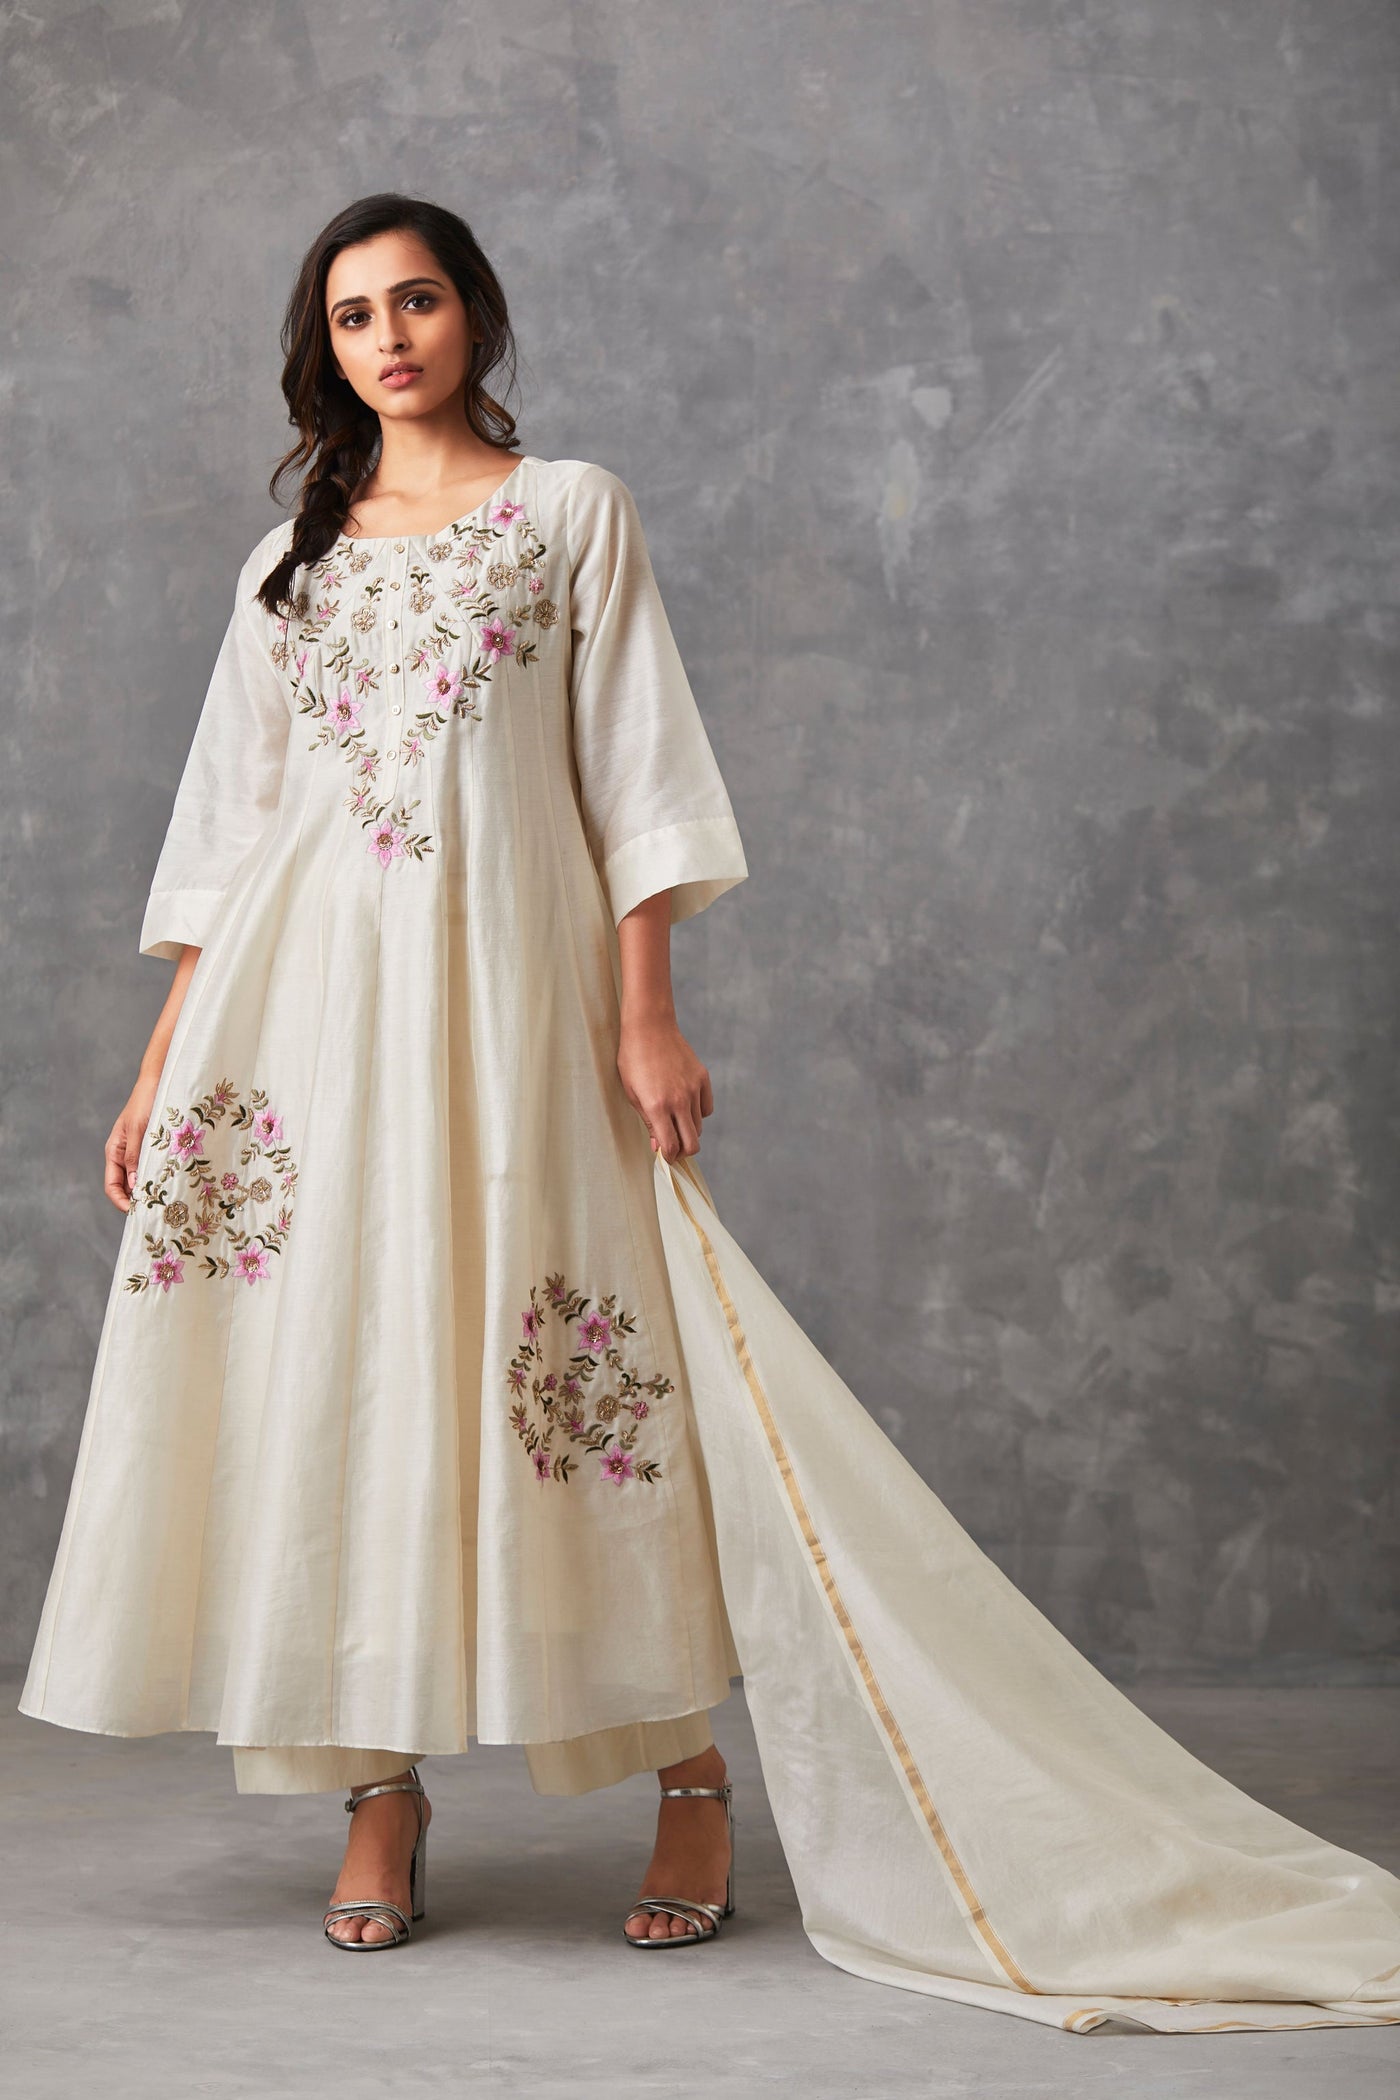 Oyster White Chanderi Anarkali - Indian Clothing in Denver, CO, Aurora, CO, Boulder, CO, Fort Collins, CO, Colorado Springs, CO, Parker, CO, Highlands Ranch, CO, Cherry Creek, CO, Centennial, CO, and Longmont, CO. Nationwide shipping USA - India Fashion X